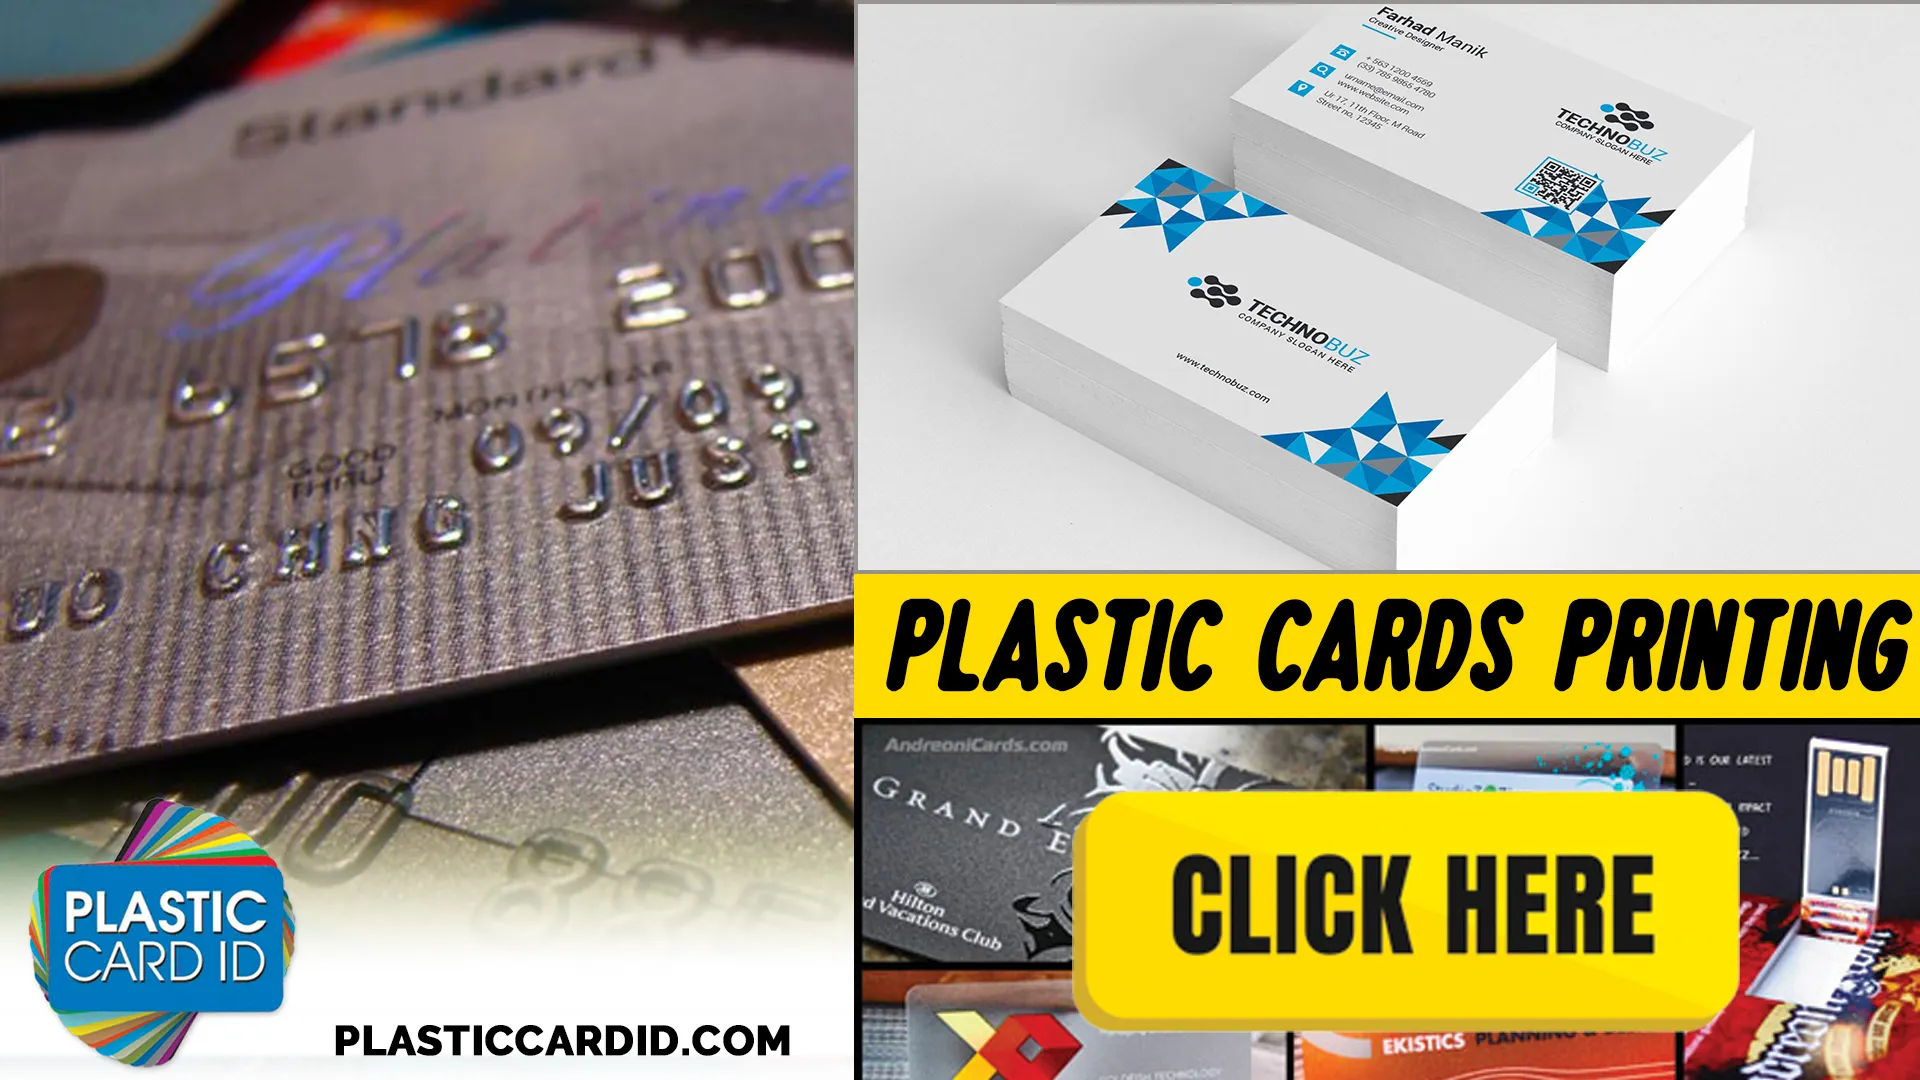 Plastic Card ID
's Approach to Card Sustainability